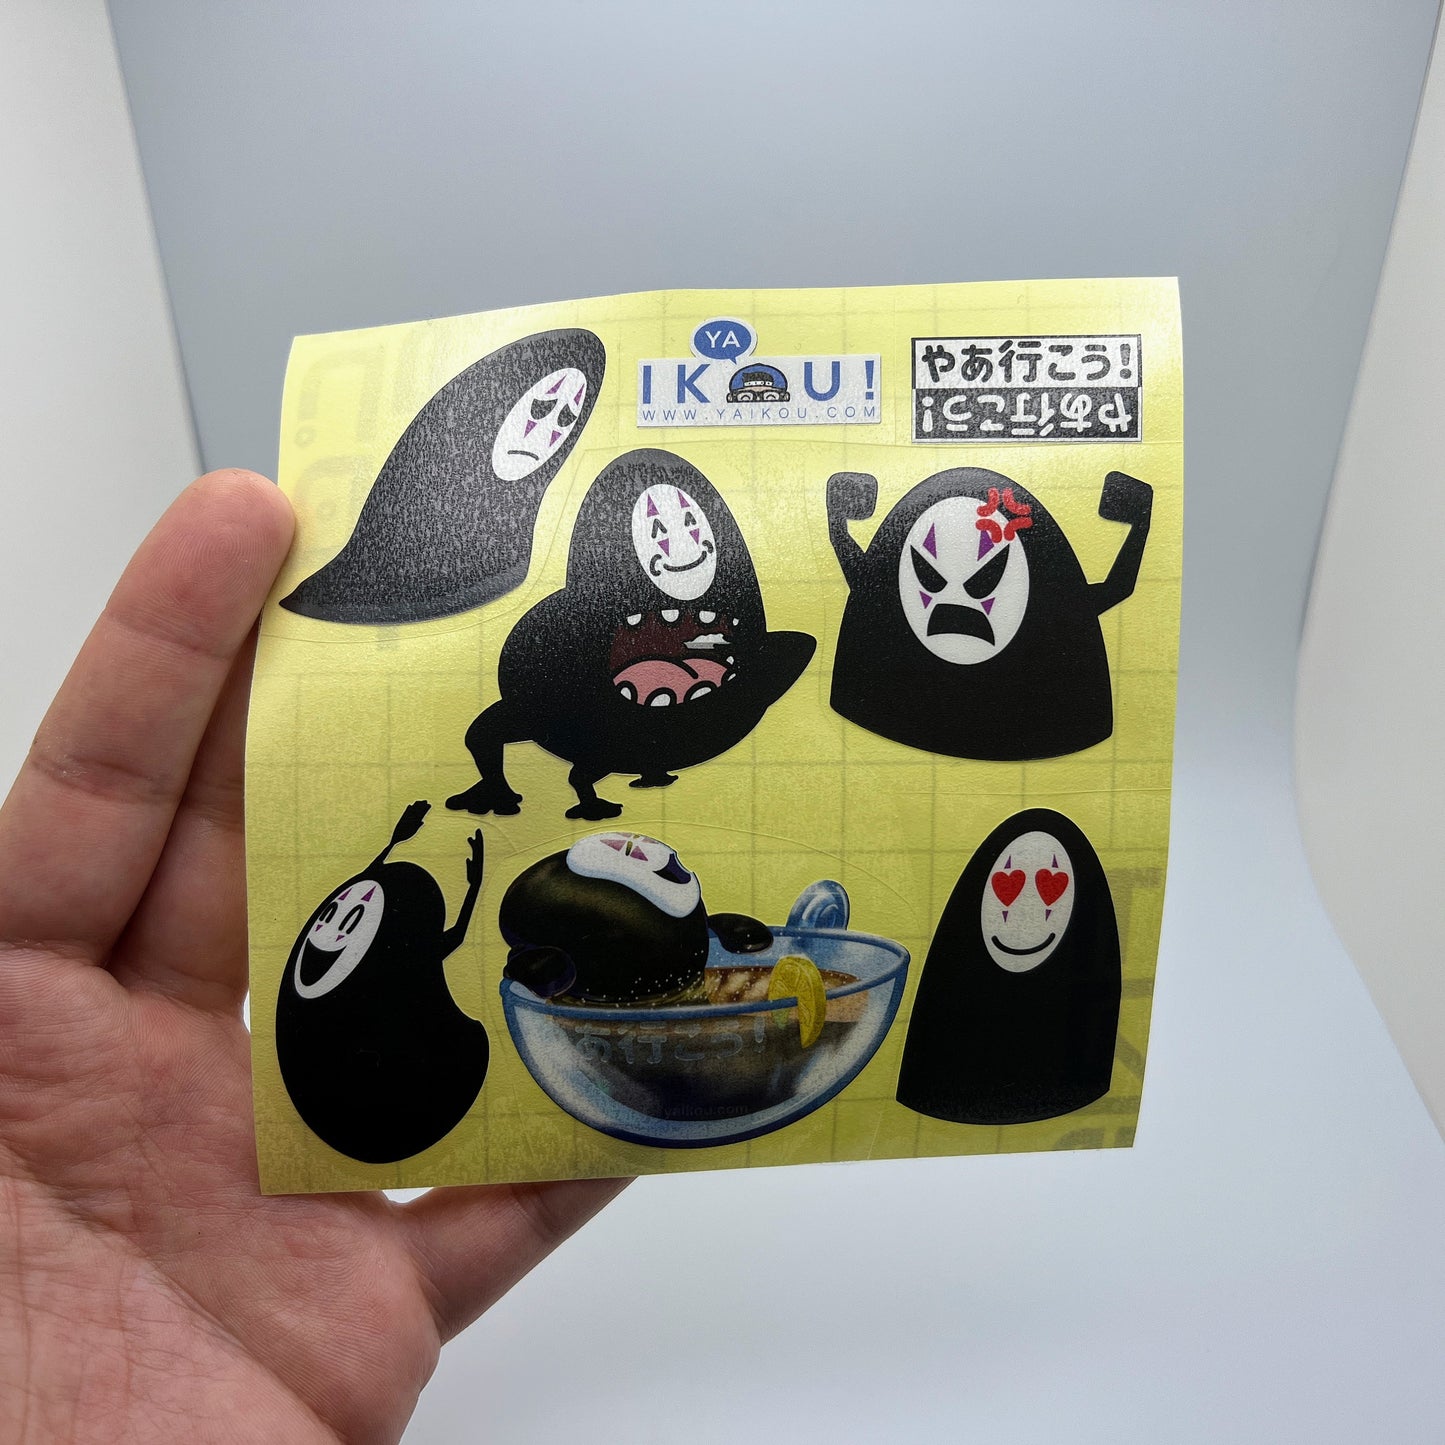 Cute No Face Stickers - for Cars, Laptops, Tea Cup, Water Bottle, etc.